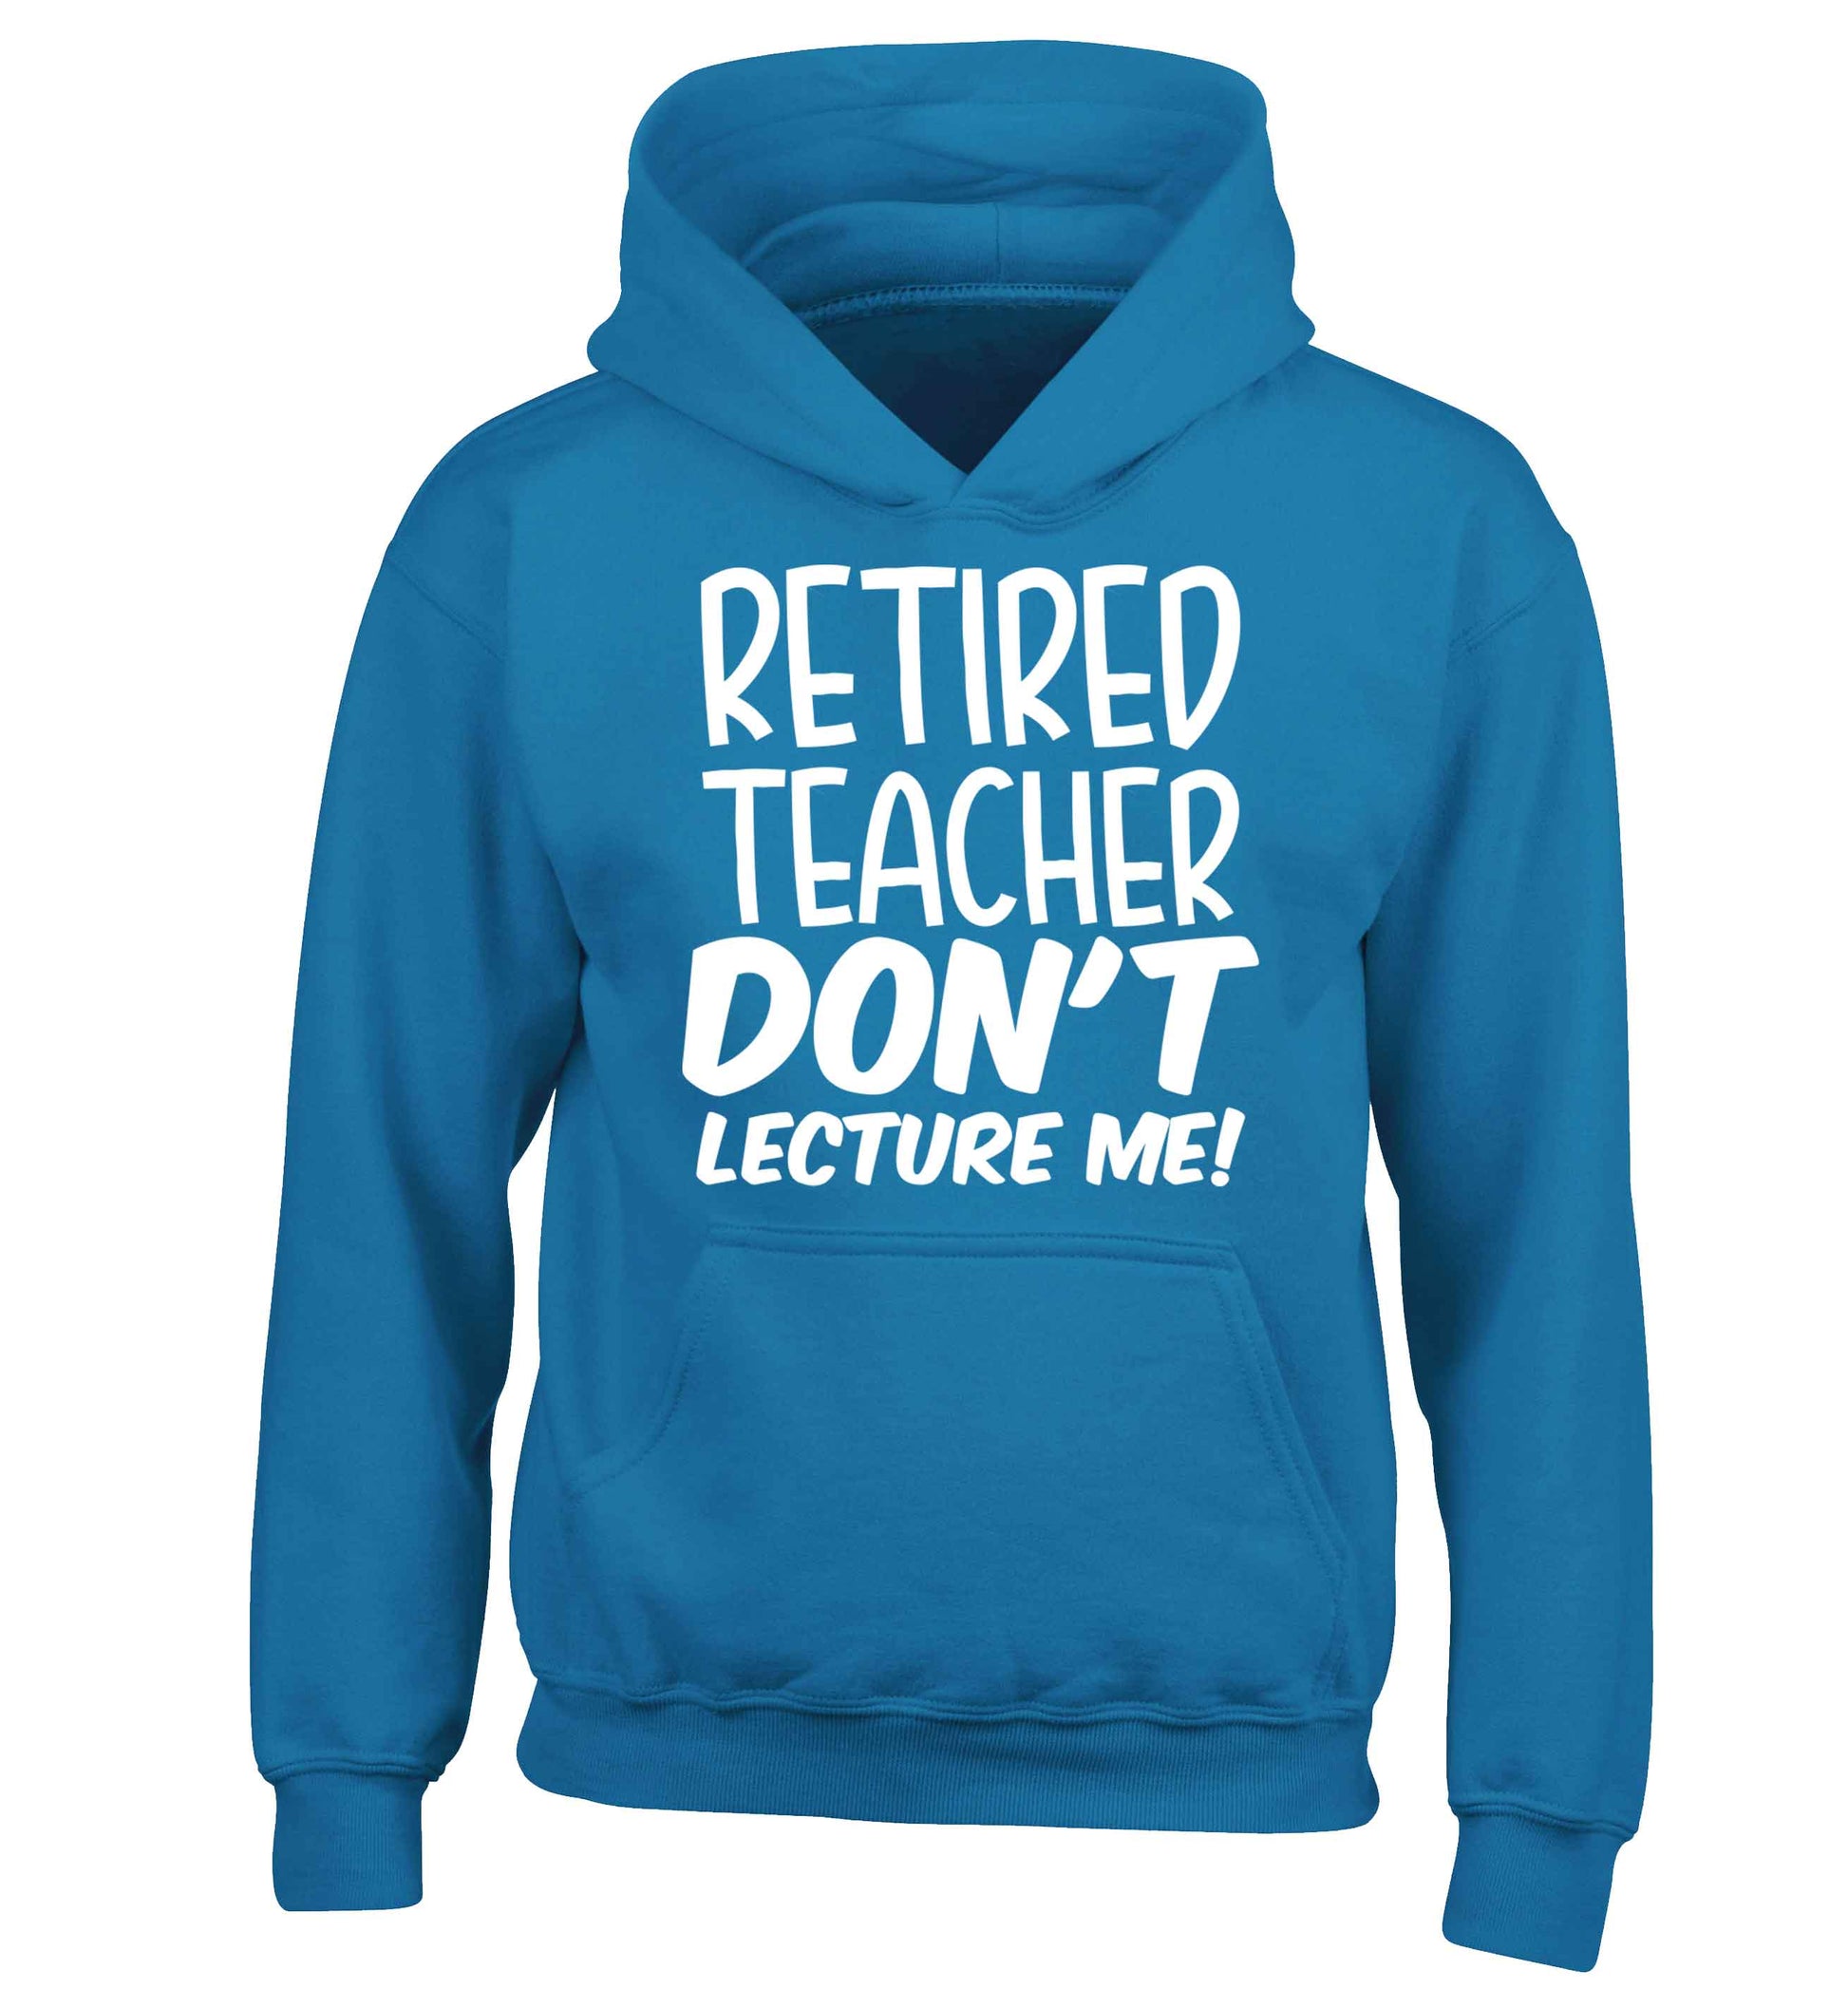 Retired teacher don't lecture me! children's blue hoodie 12-13 Years